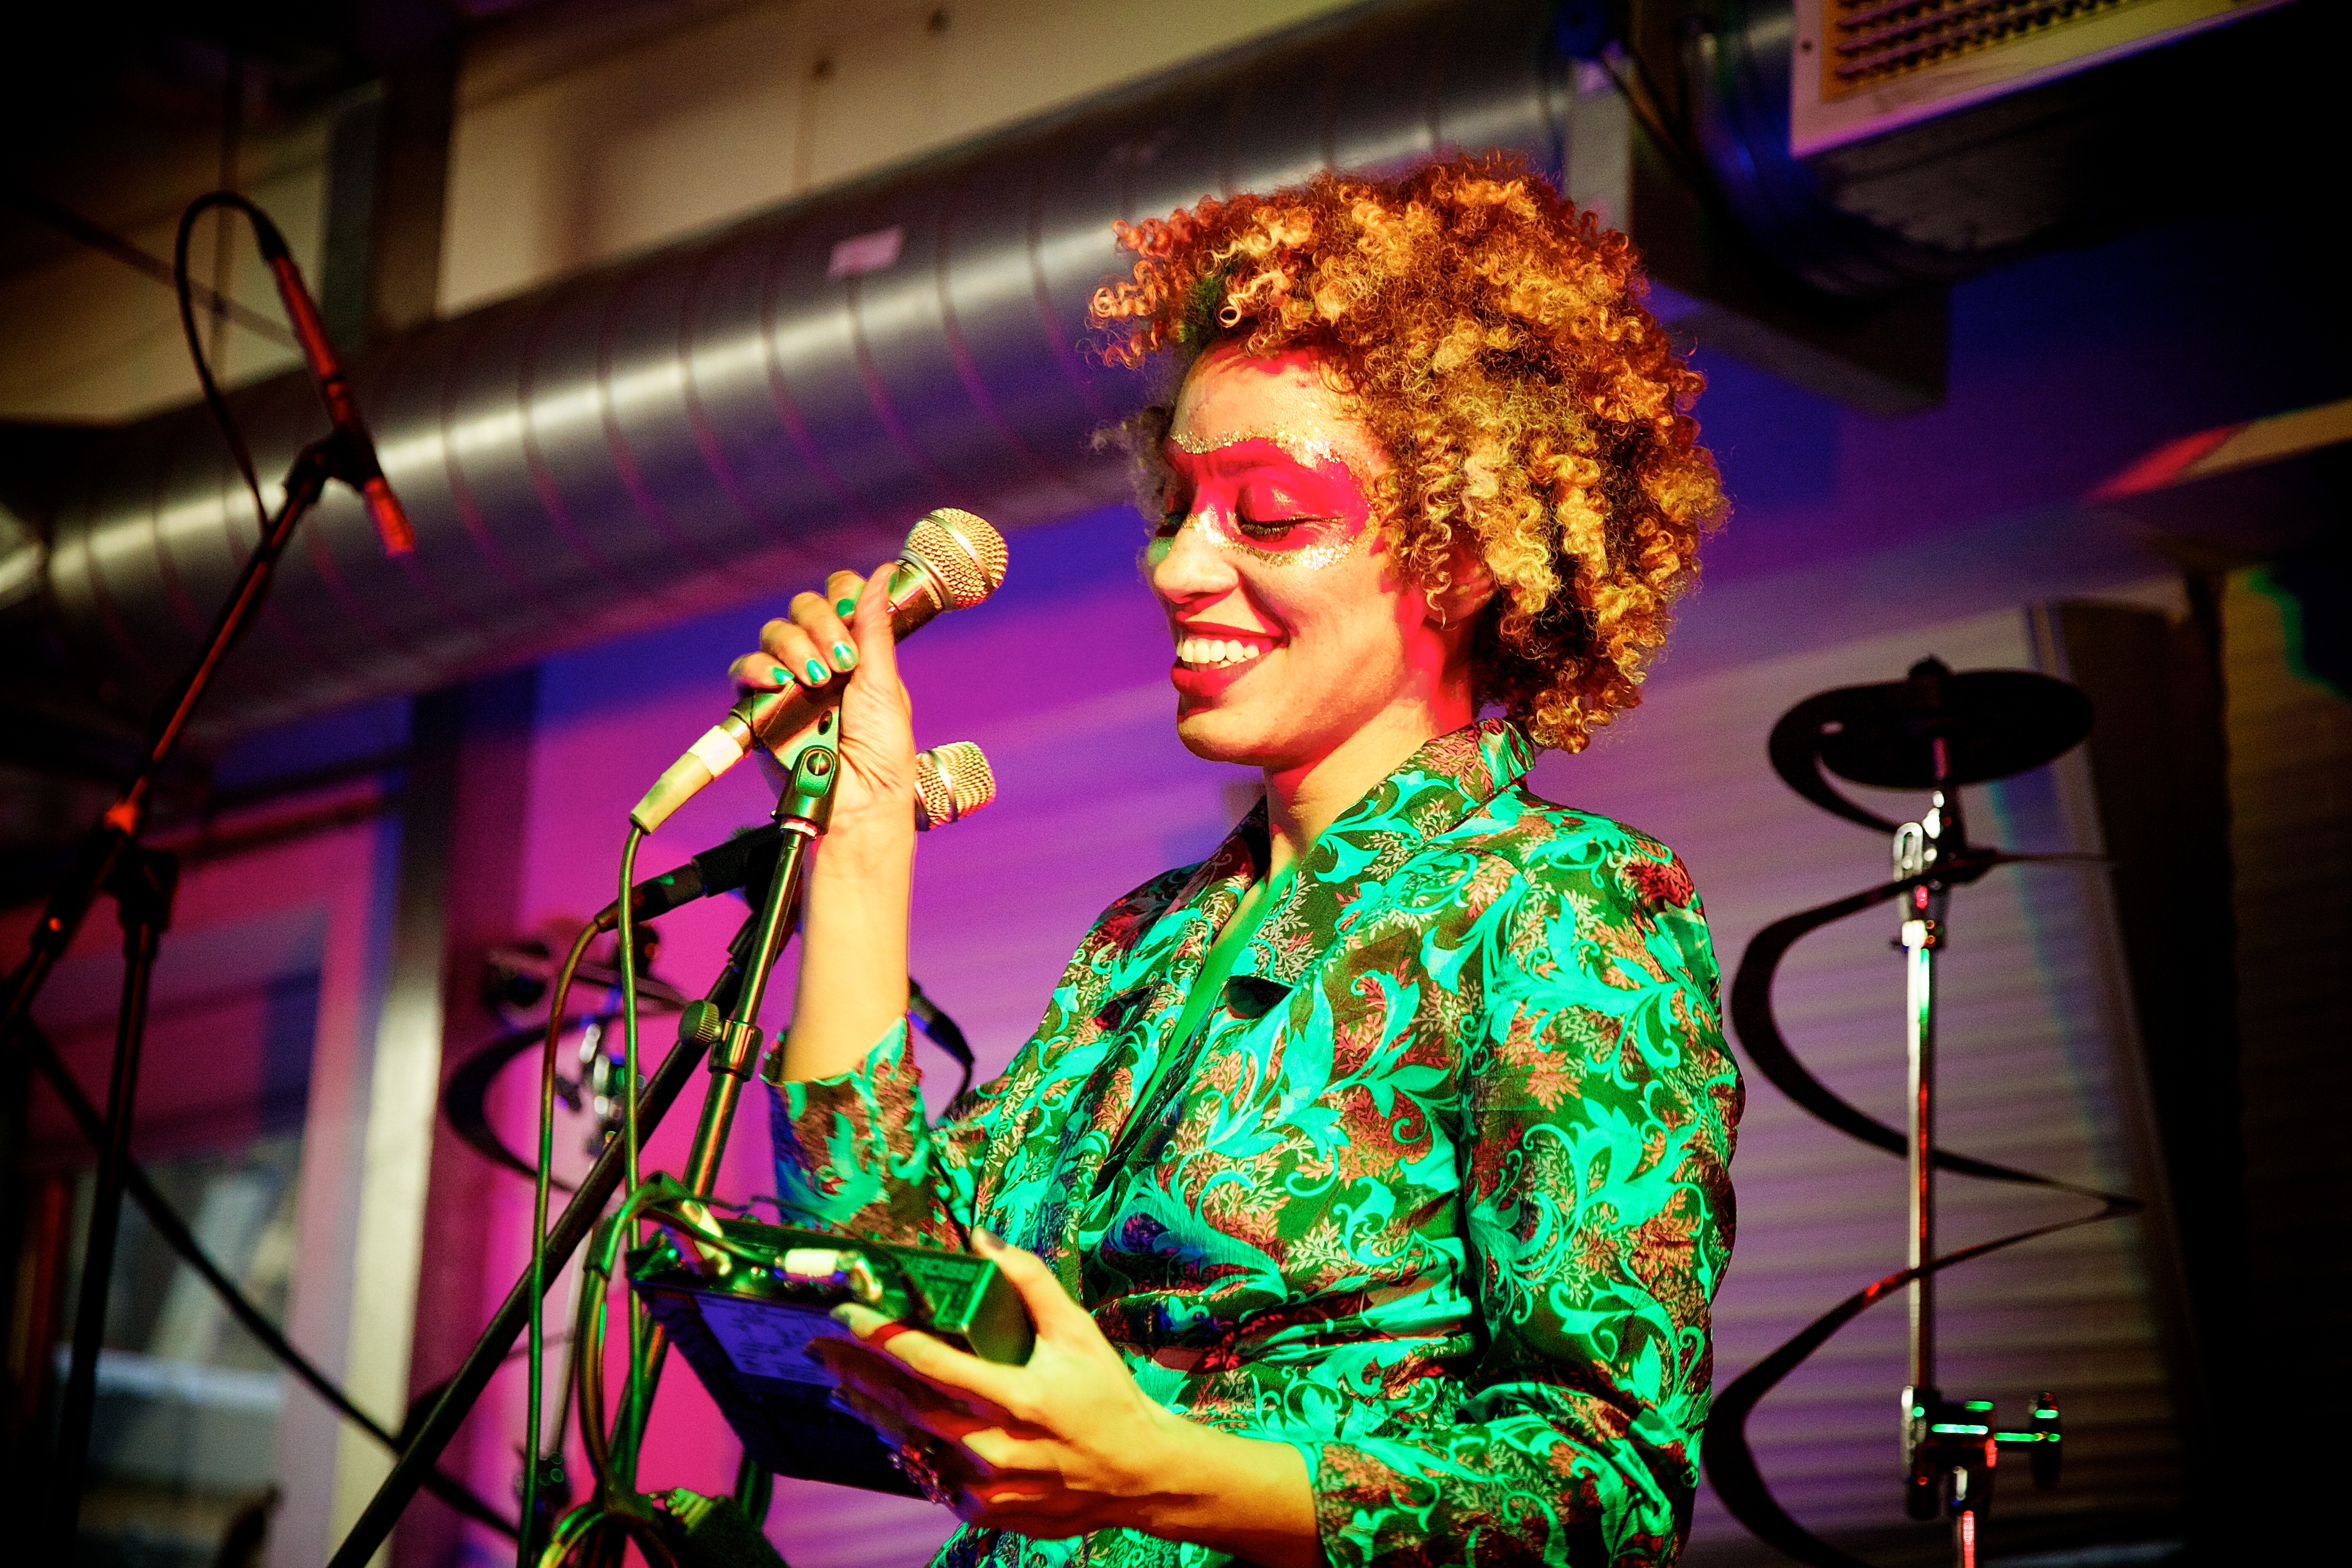 Martina Topley-bird Backgrounds, Compatible - PC, Mobile, Gadgets| 5616x3744 px